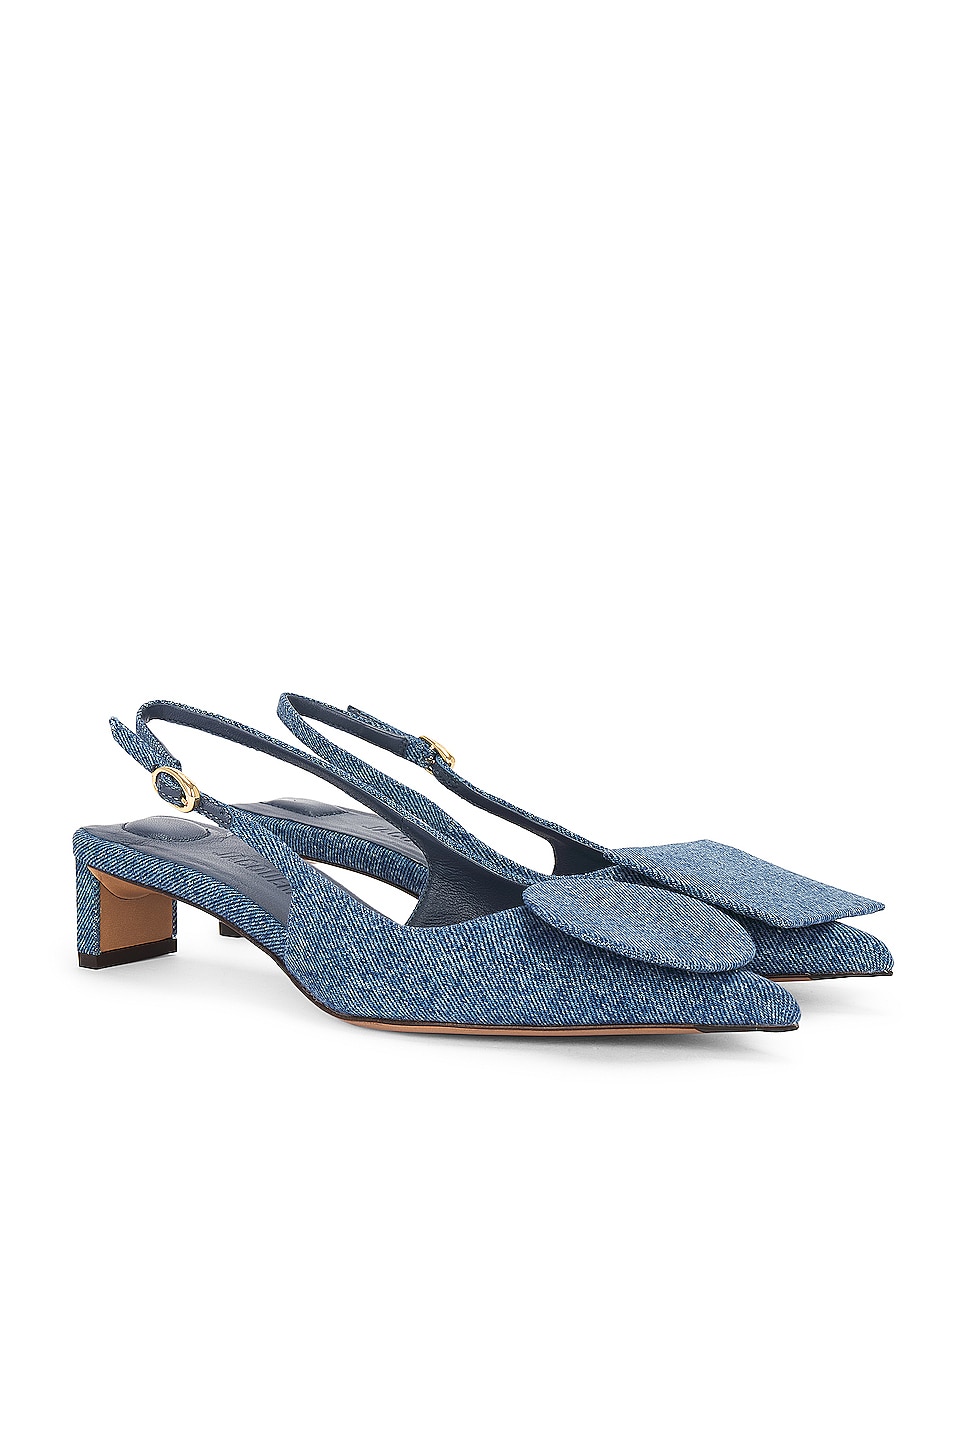 Image 1 of JACQUEMUS Les Slingbacks Duelo B in Blue